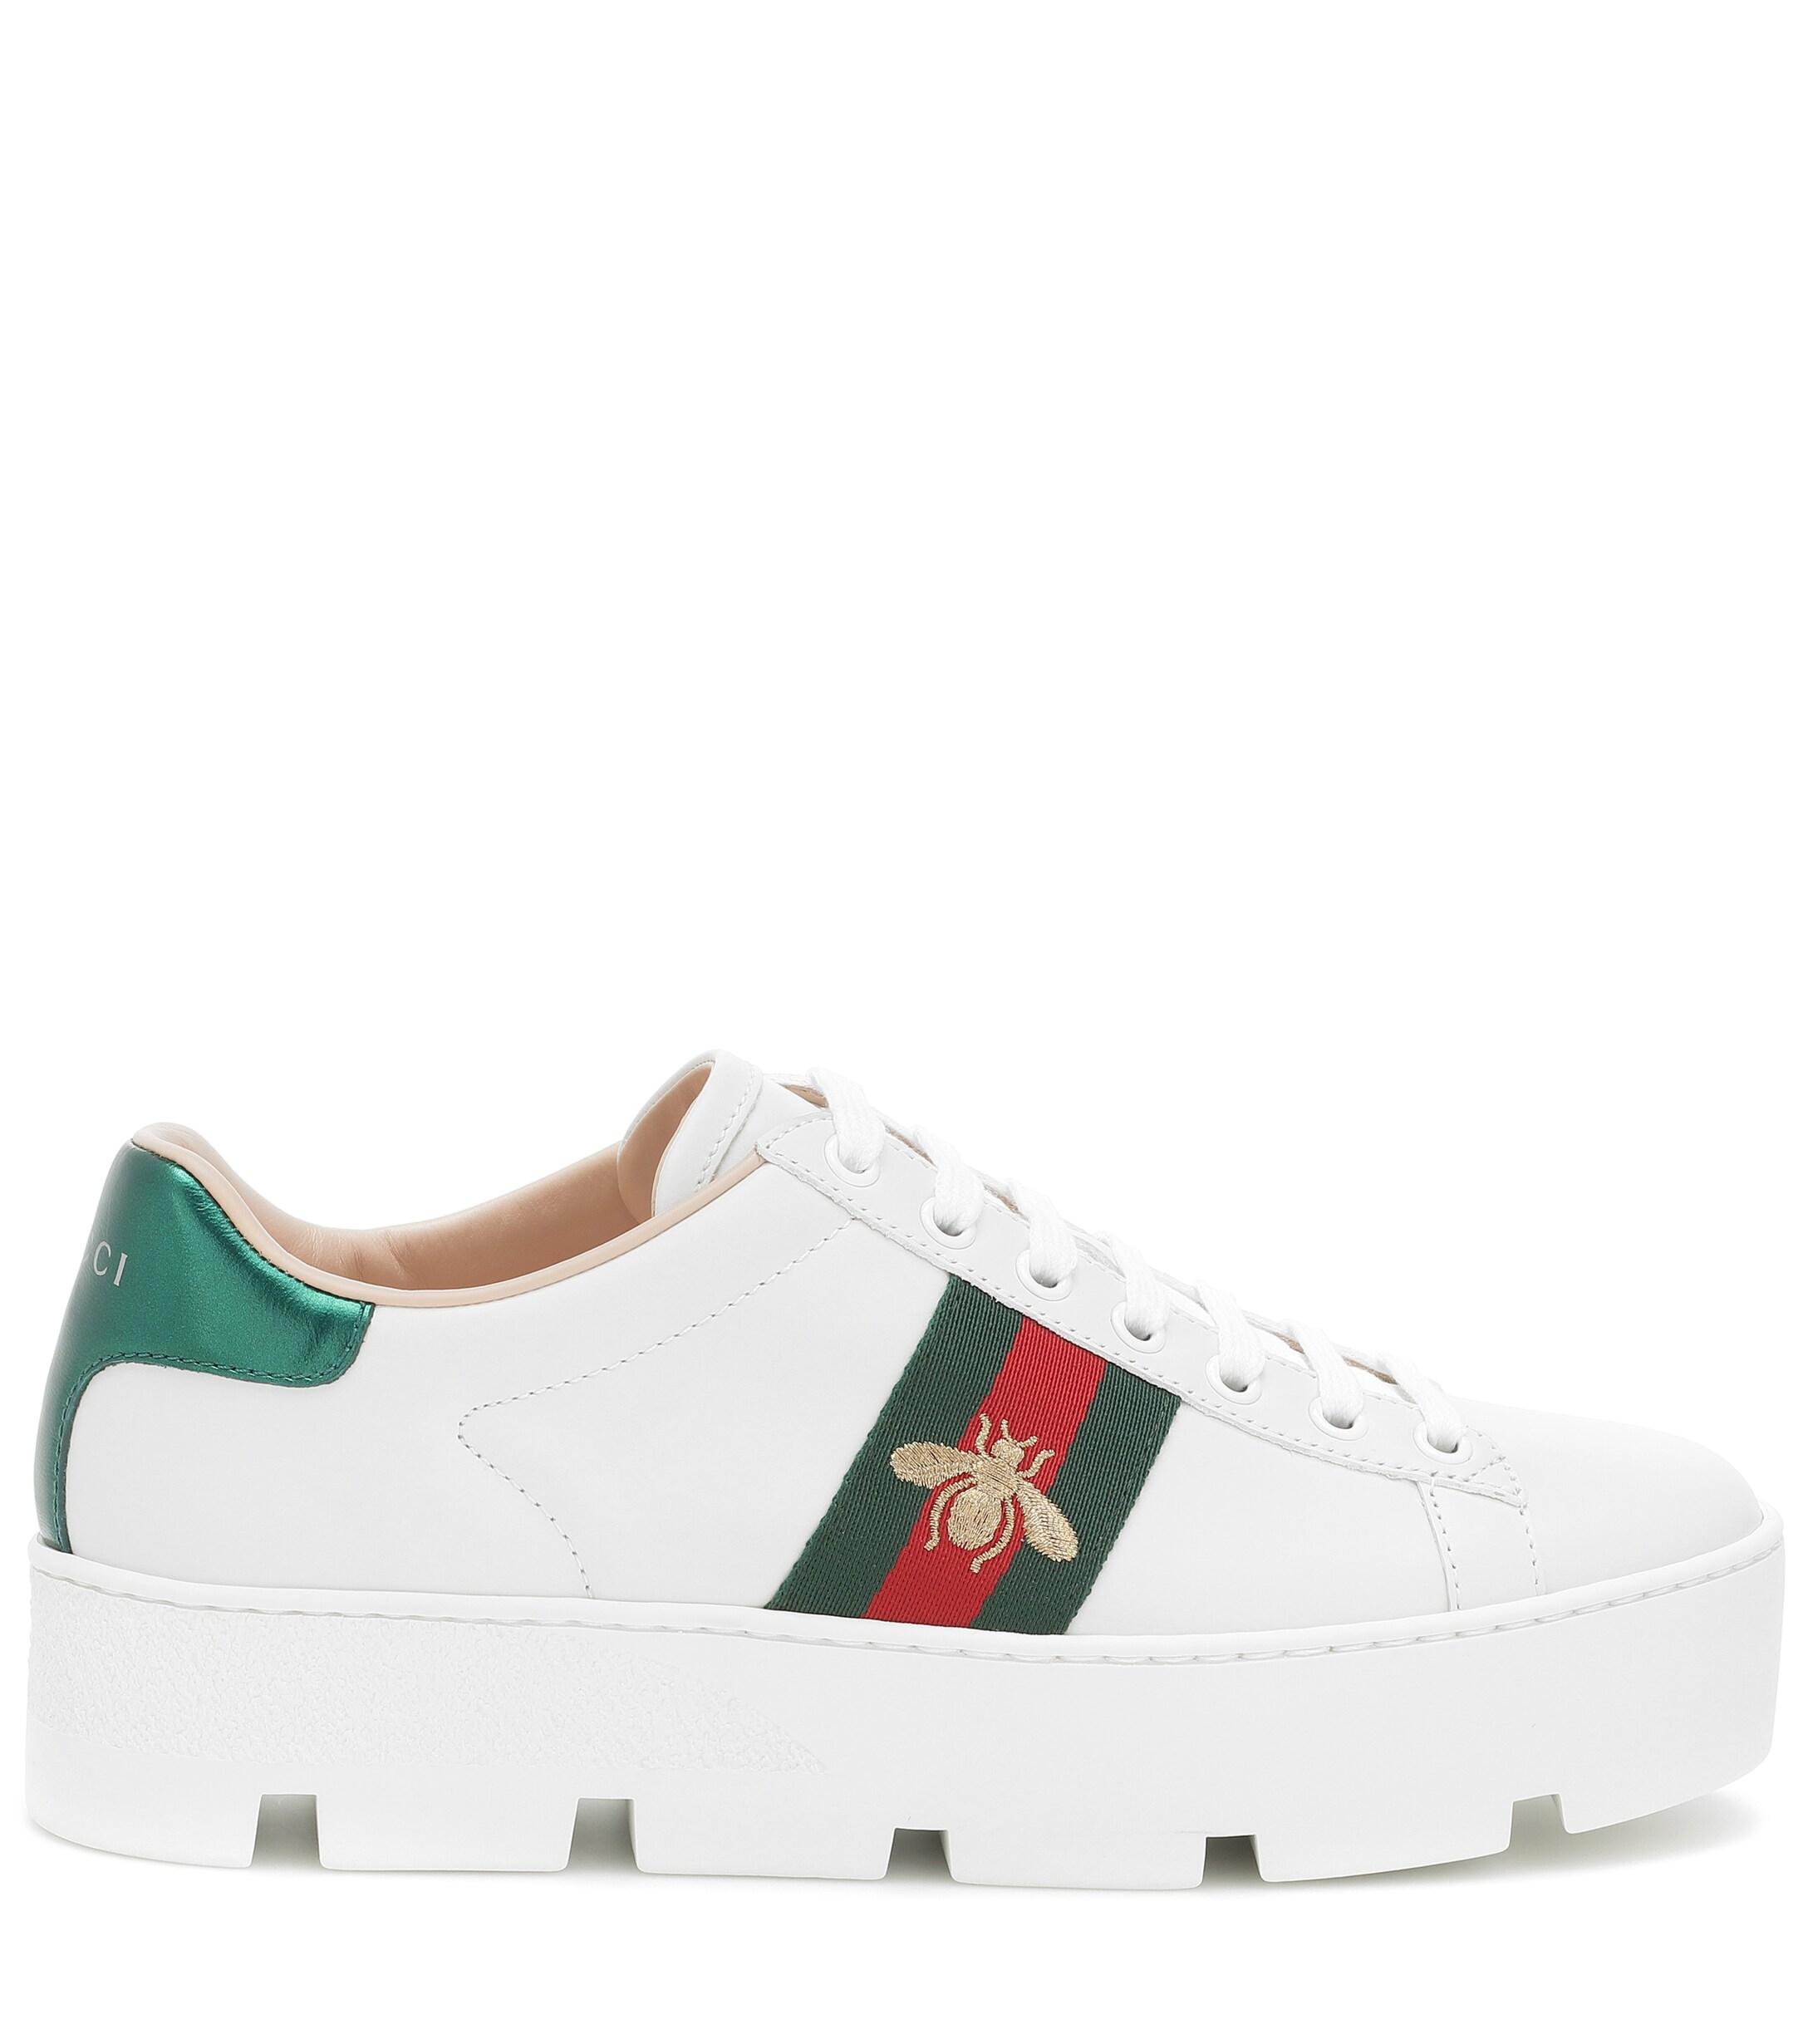 Gucci Ace Leather Flatform Trainers in White - Save 27% - Lyst